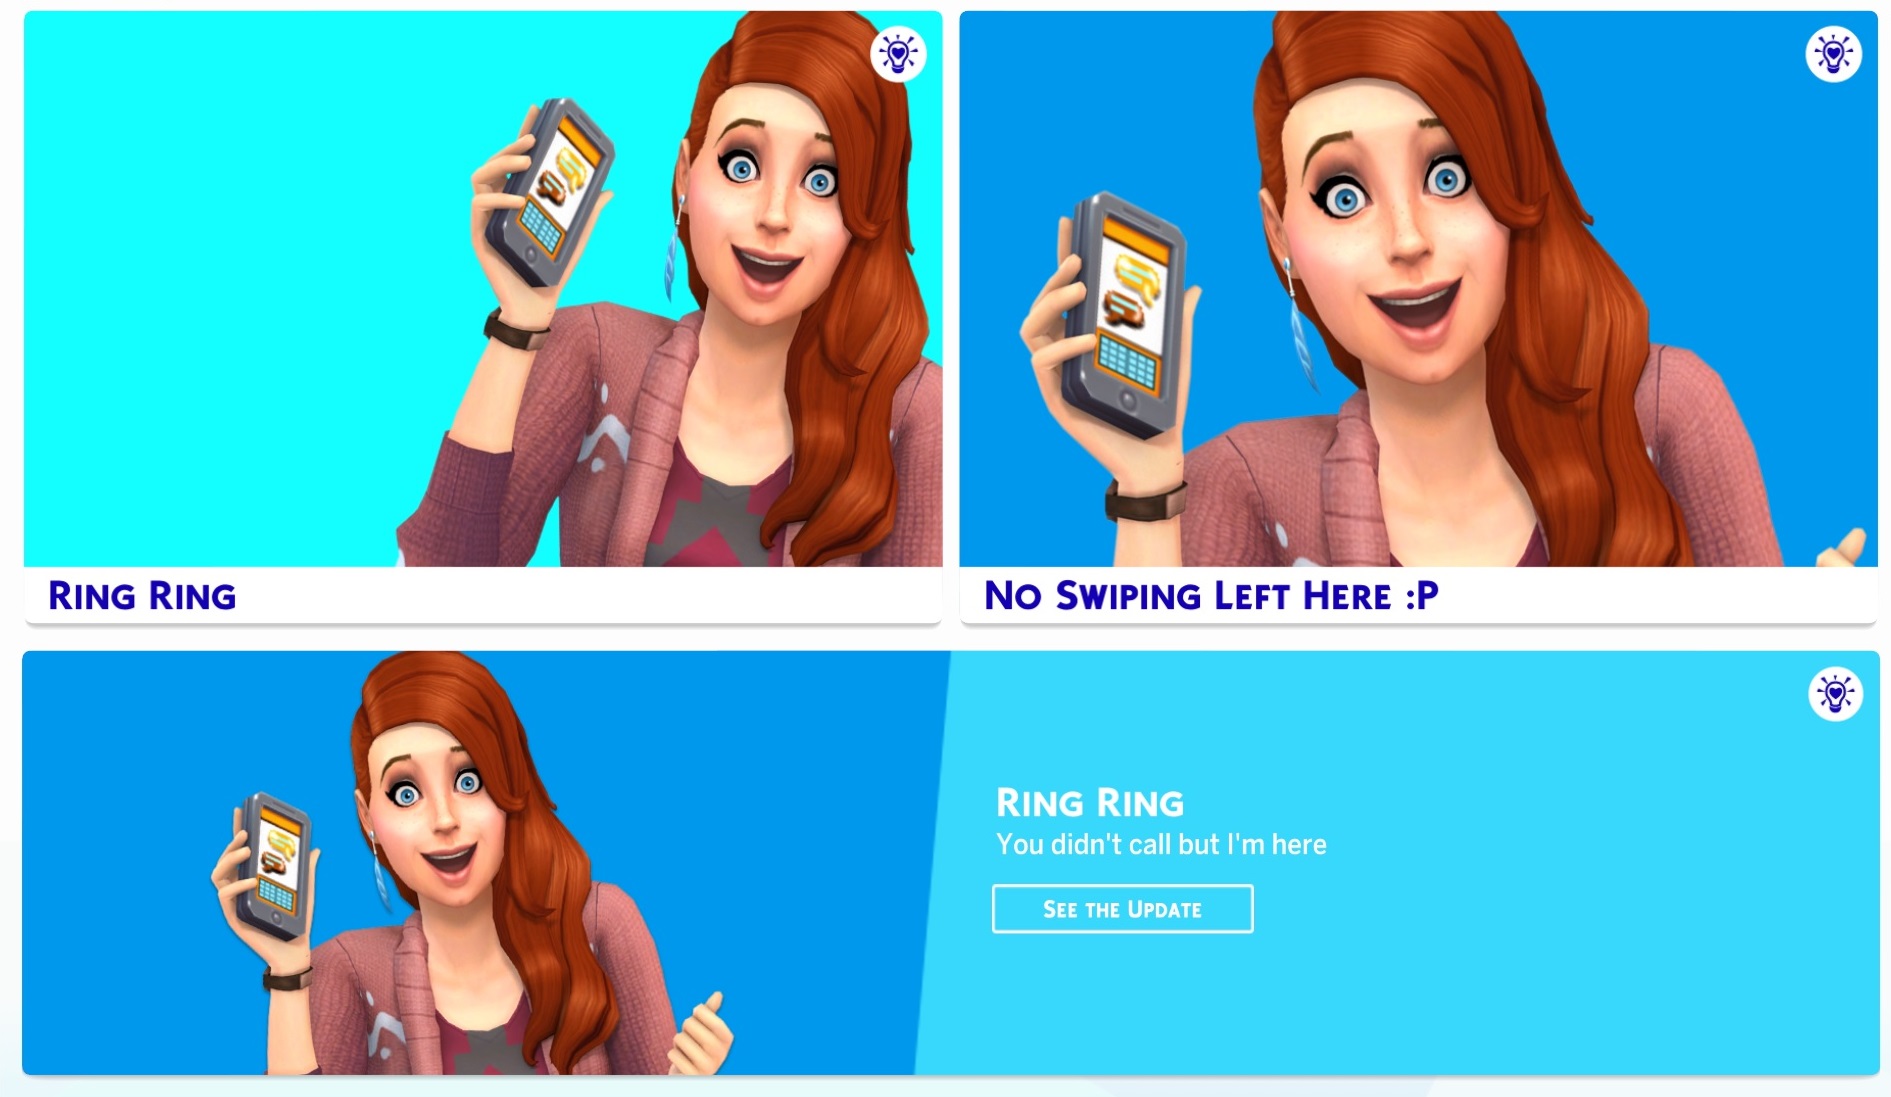 I did download the legacy edition and I'm still getting this pop up when I  try to start the game. : r/Sims4